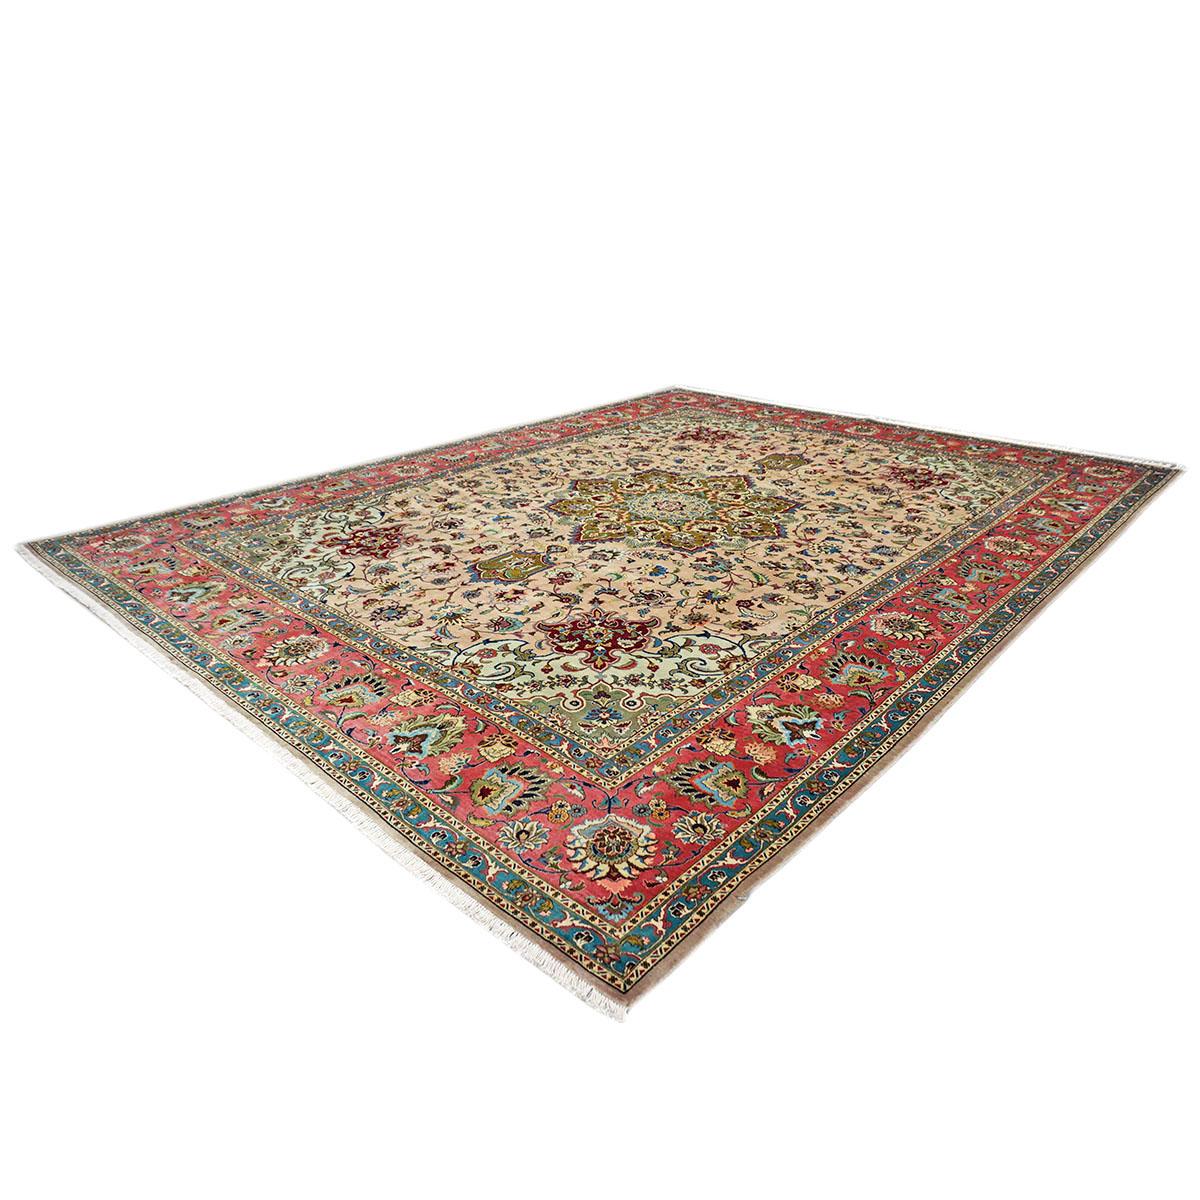 Antique Persian Tabriz 9x12 Red, Green, & Ivory Handmade Area Rug In Good Condition For Sale In Houston, TX